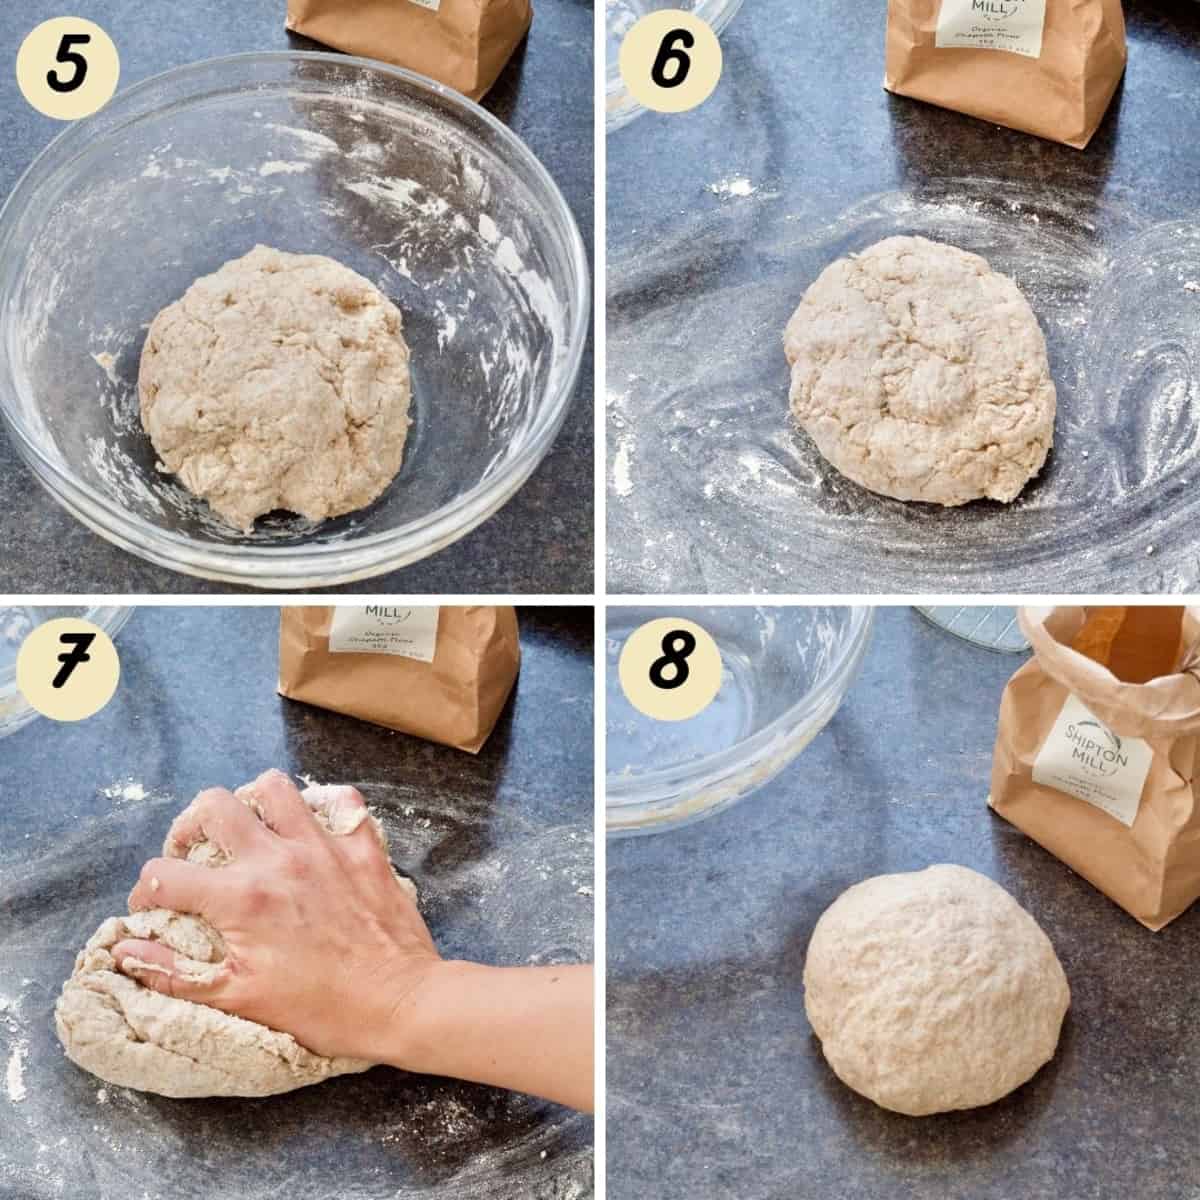 Kneading dough from shaggy to smooth.